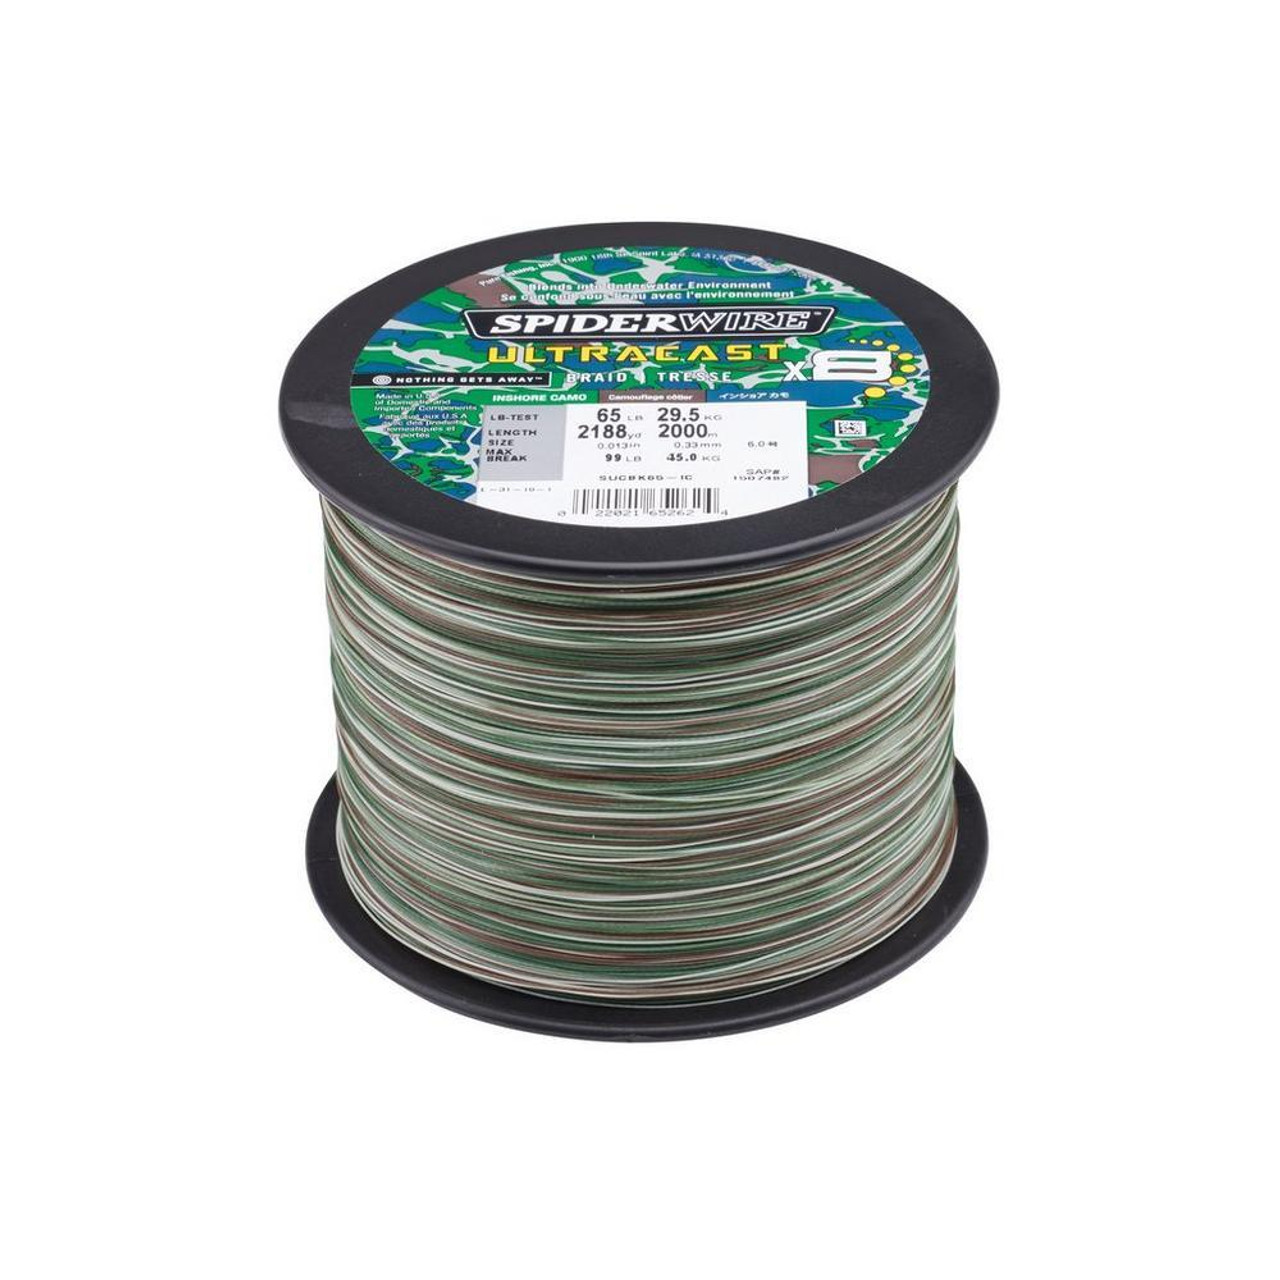 Spiderwire Ultracast Braid Line - Yeager's Sporting Goods